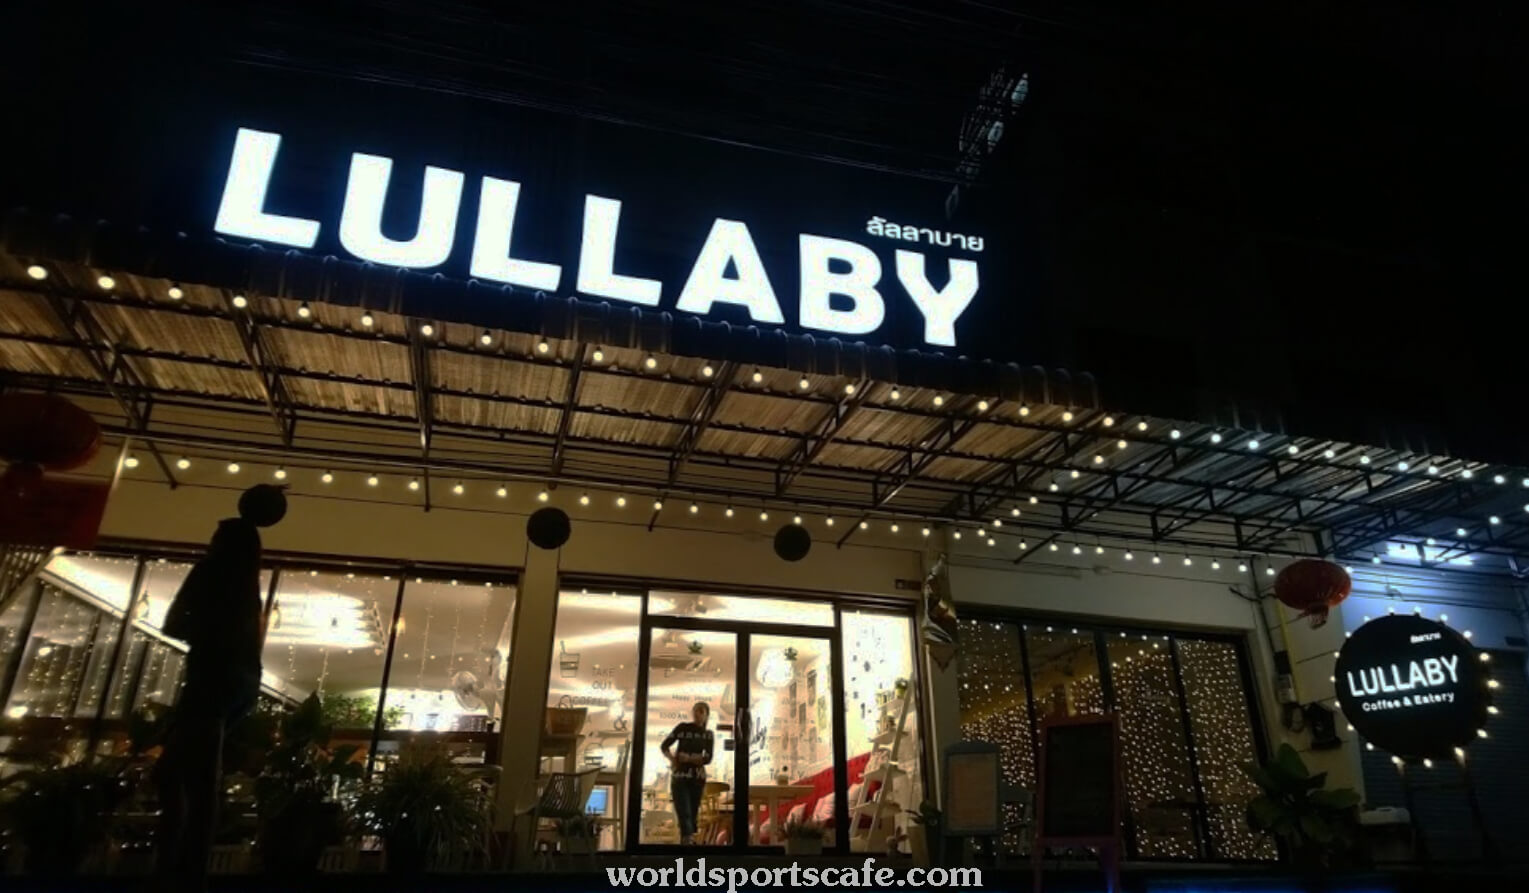 Lullaby Coffee